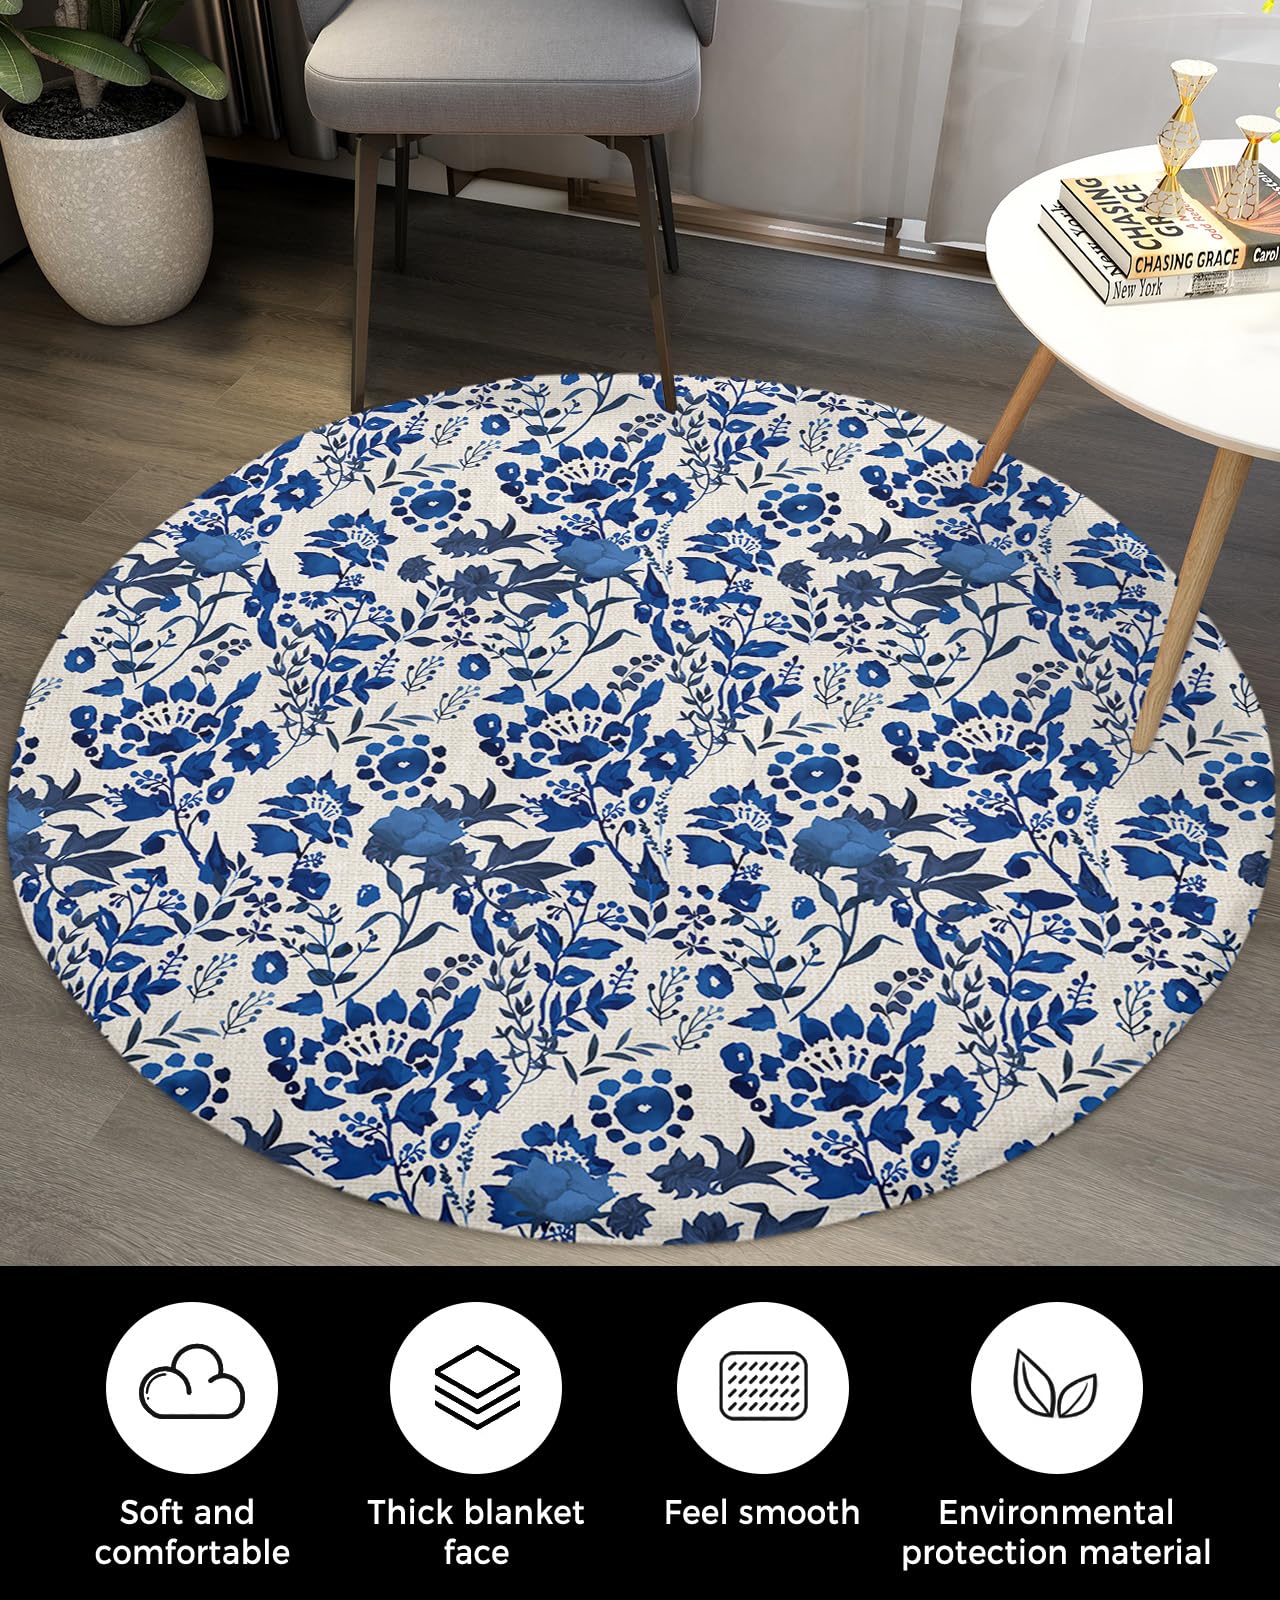 Floral Leaves Fluffy Round Area Rug Carpets 4ft, Plush Shaggy Carpet Soft Circular Rugs, Non-Slip Fuzzy Accent Floor Mat for Living Room Bedroom Nursery Home Decor Vintage Blue Botanical Plant Flower